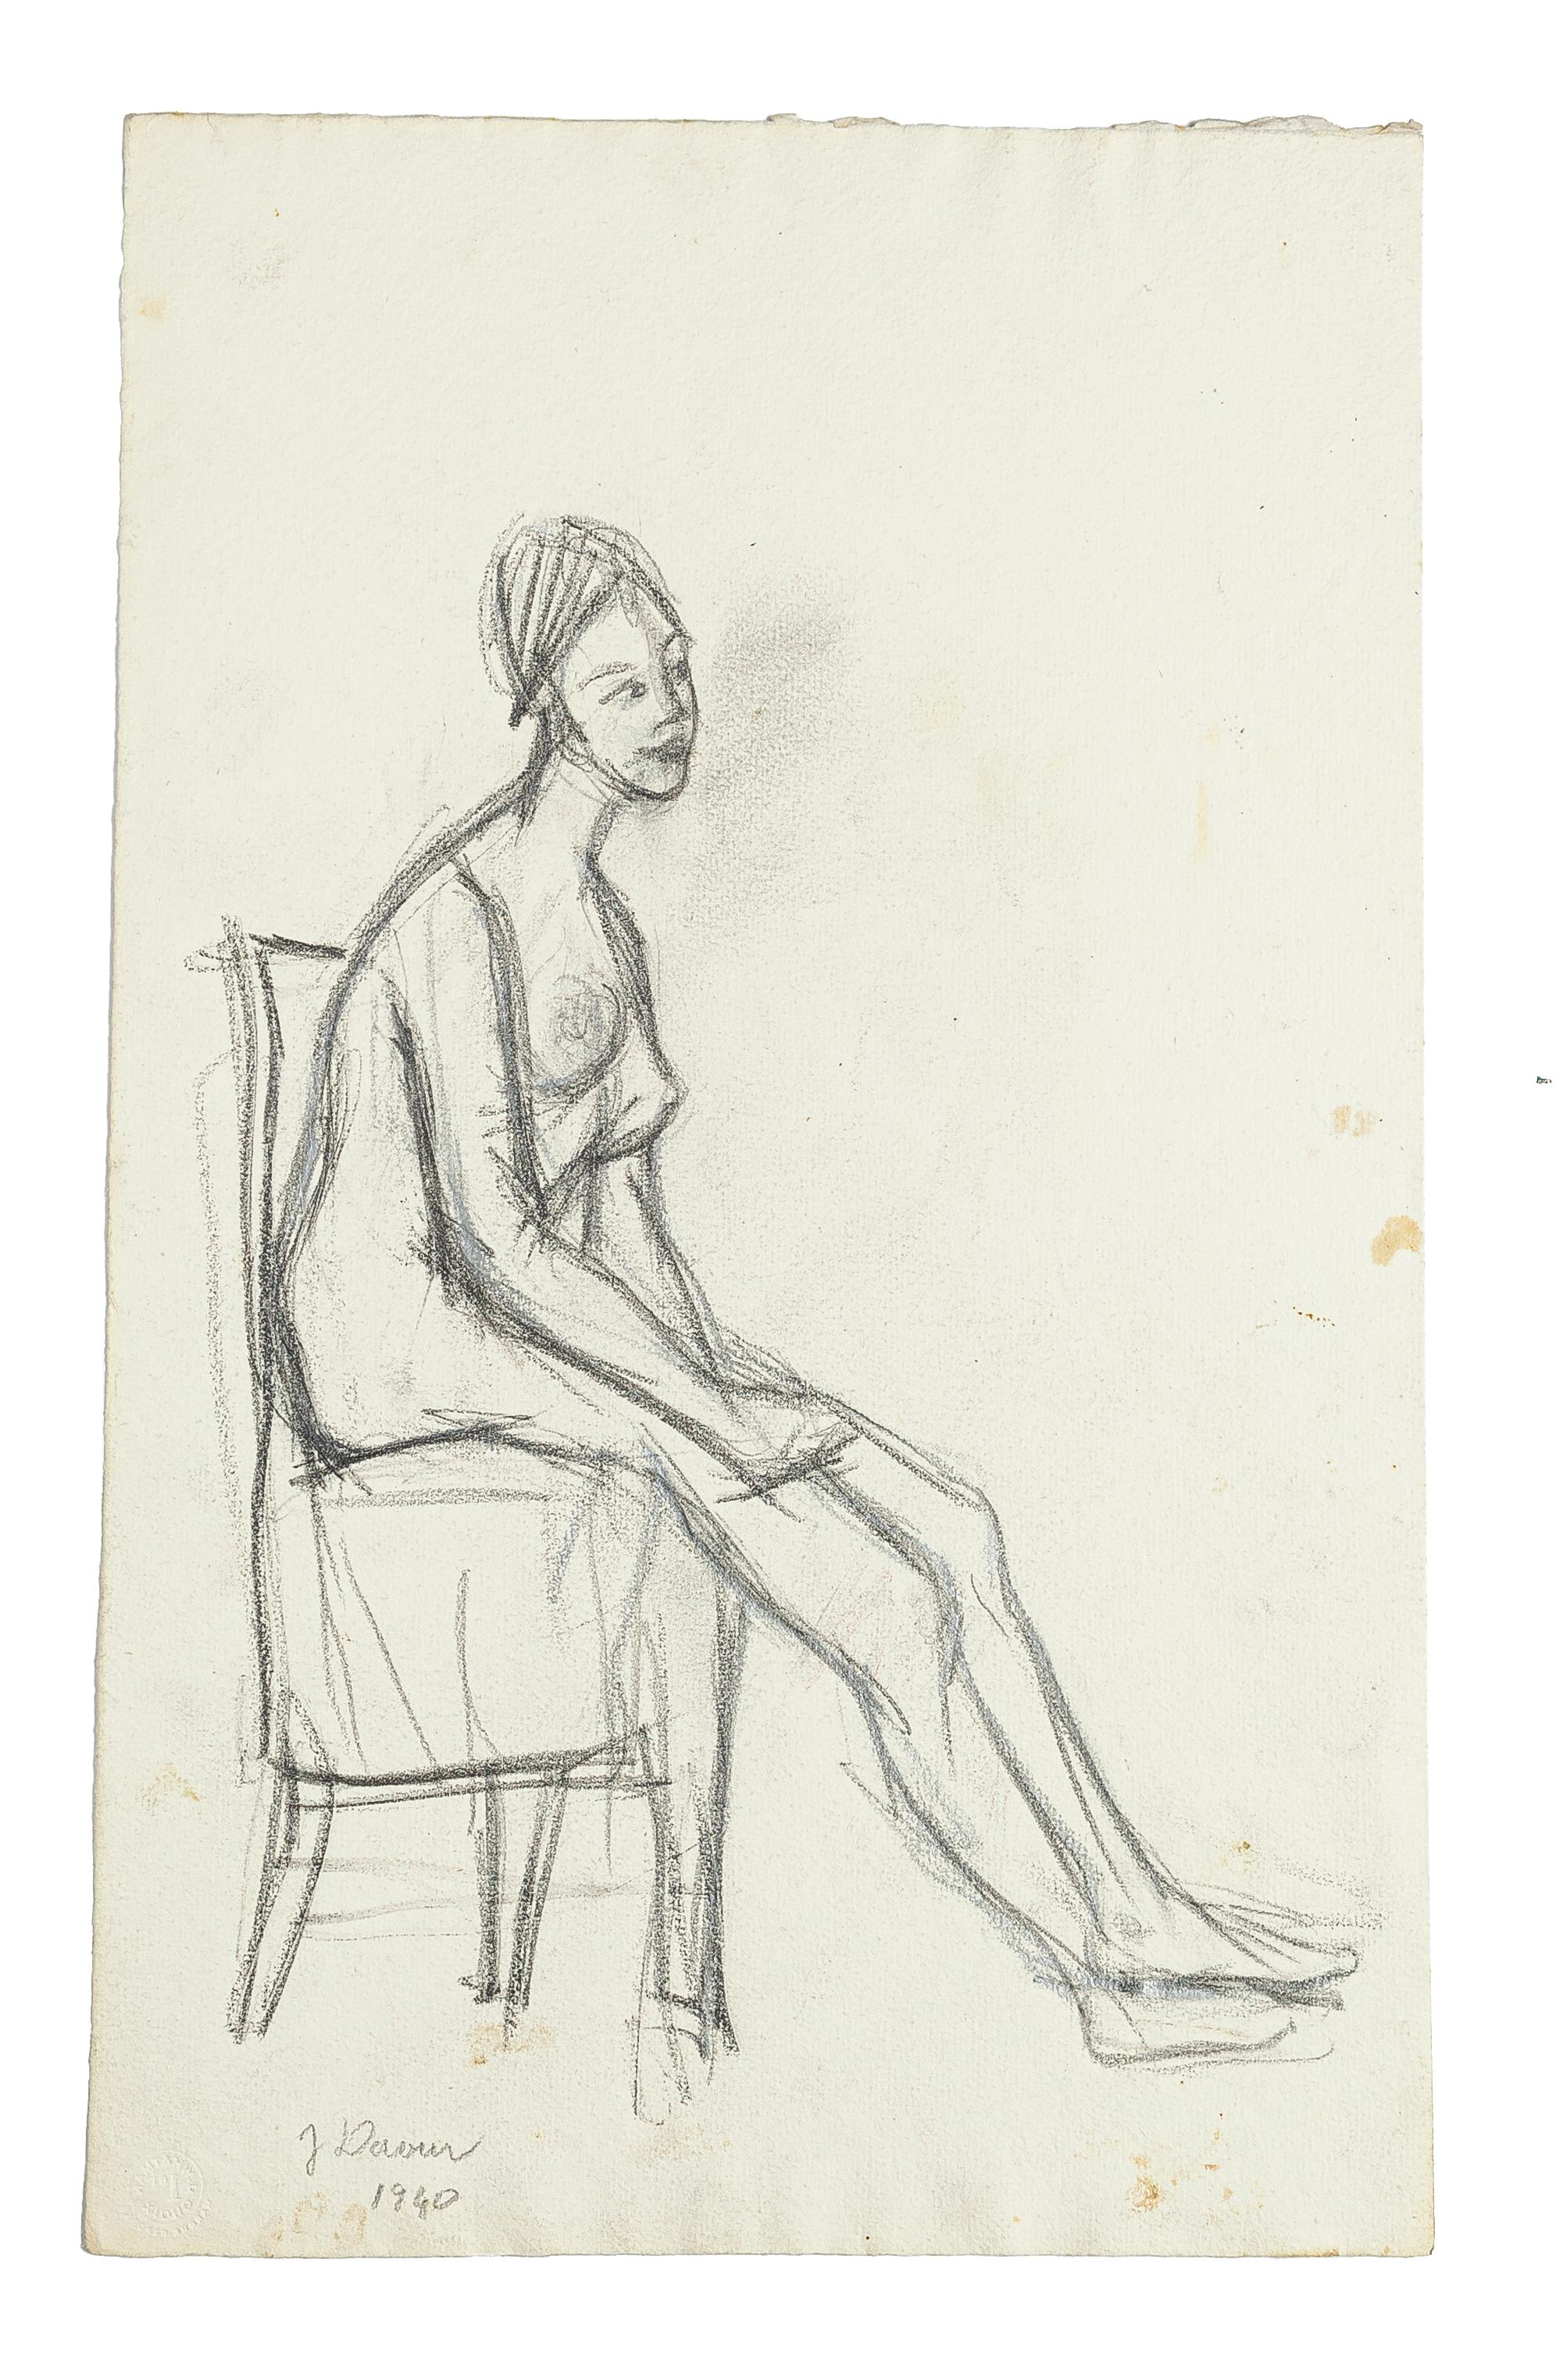 Nude - Original Pencil Drawing by Jeanne Daour - 1940